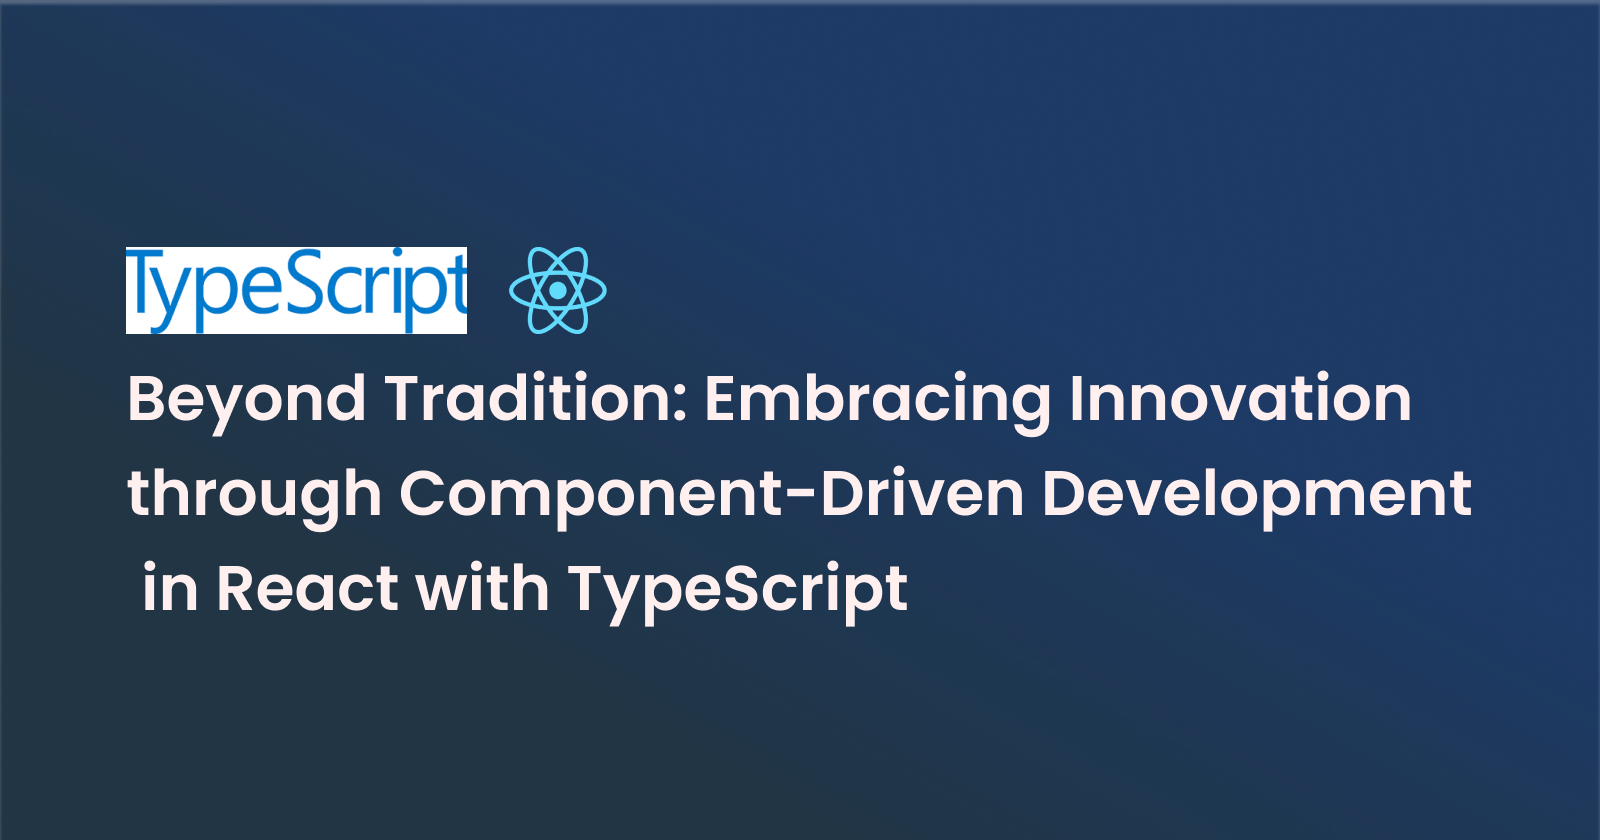 Beyond Tradition: Innovating with Component-Driven Development